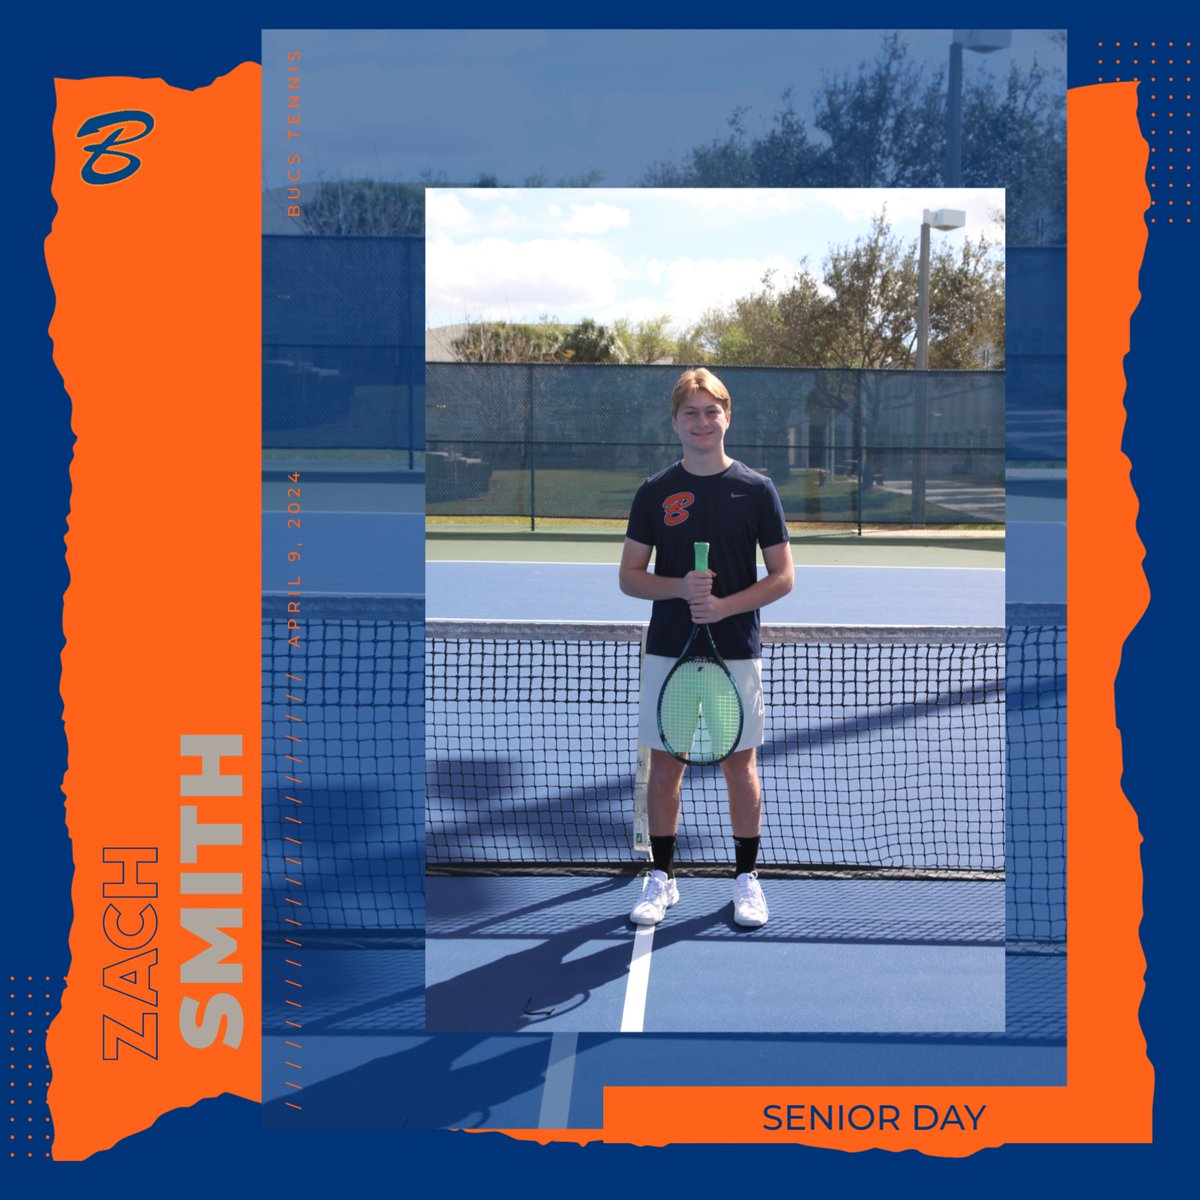 And happy Senior Day to our only Boys Tennis Senior.... Zach Smith!